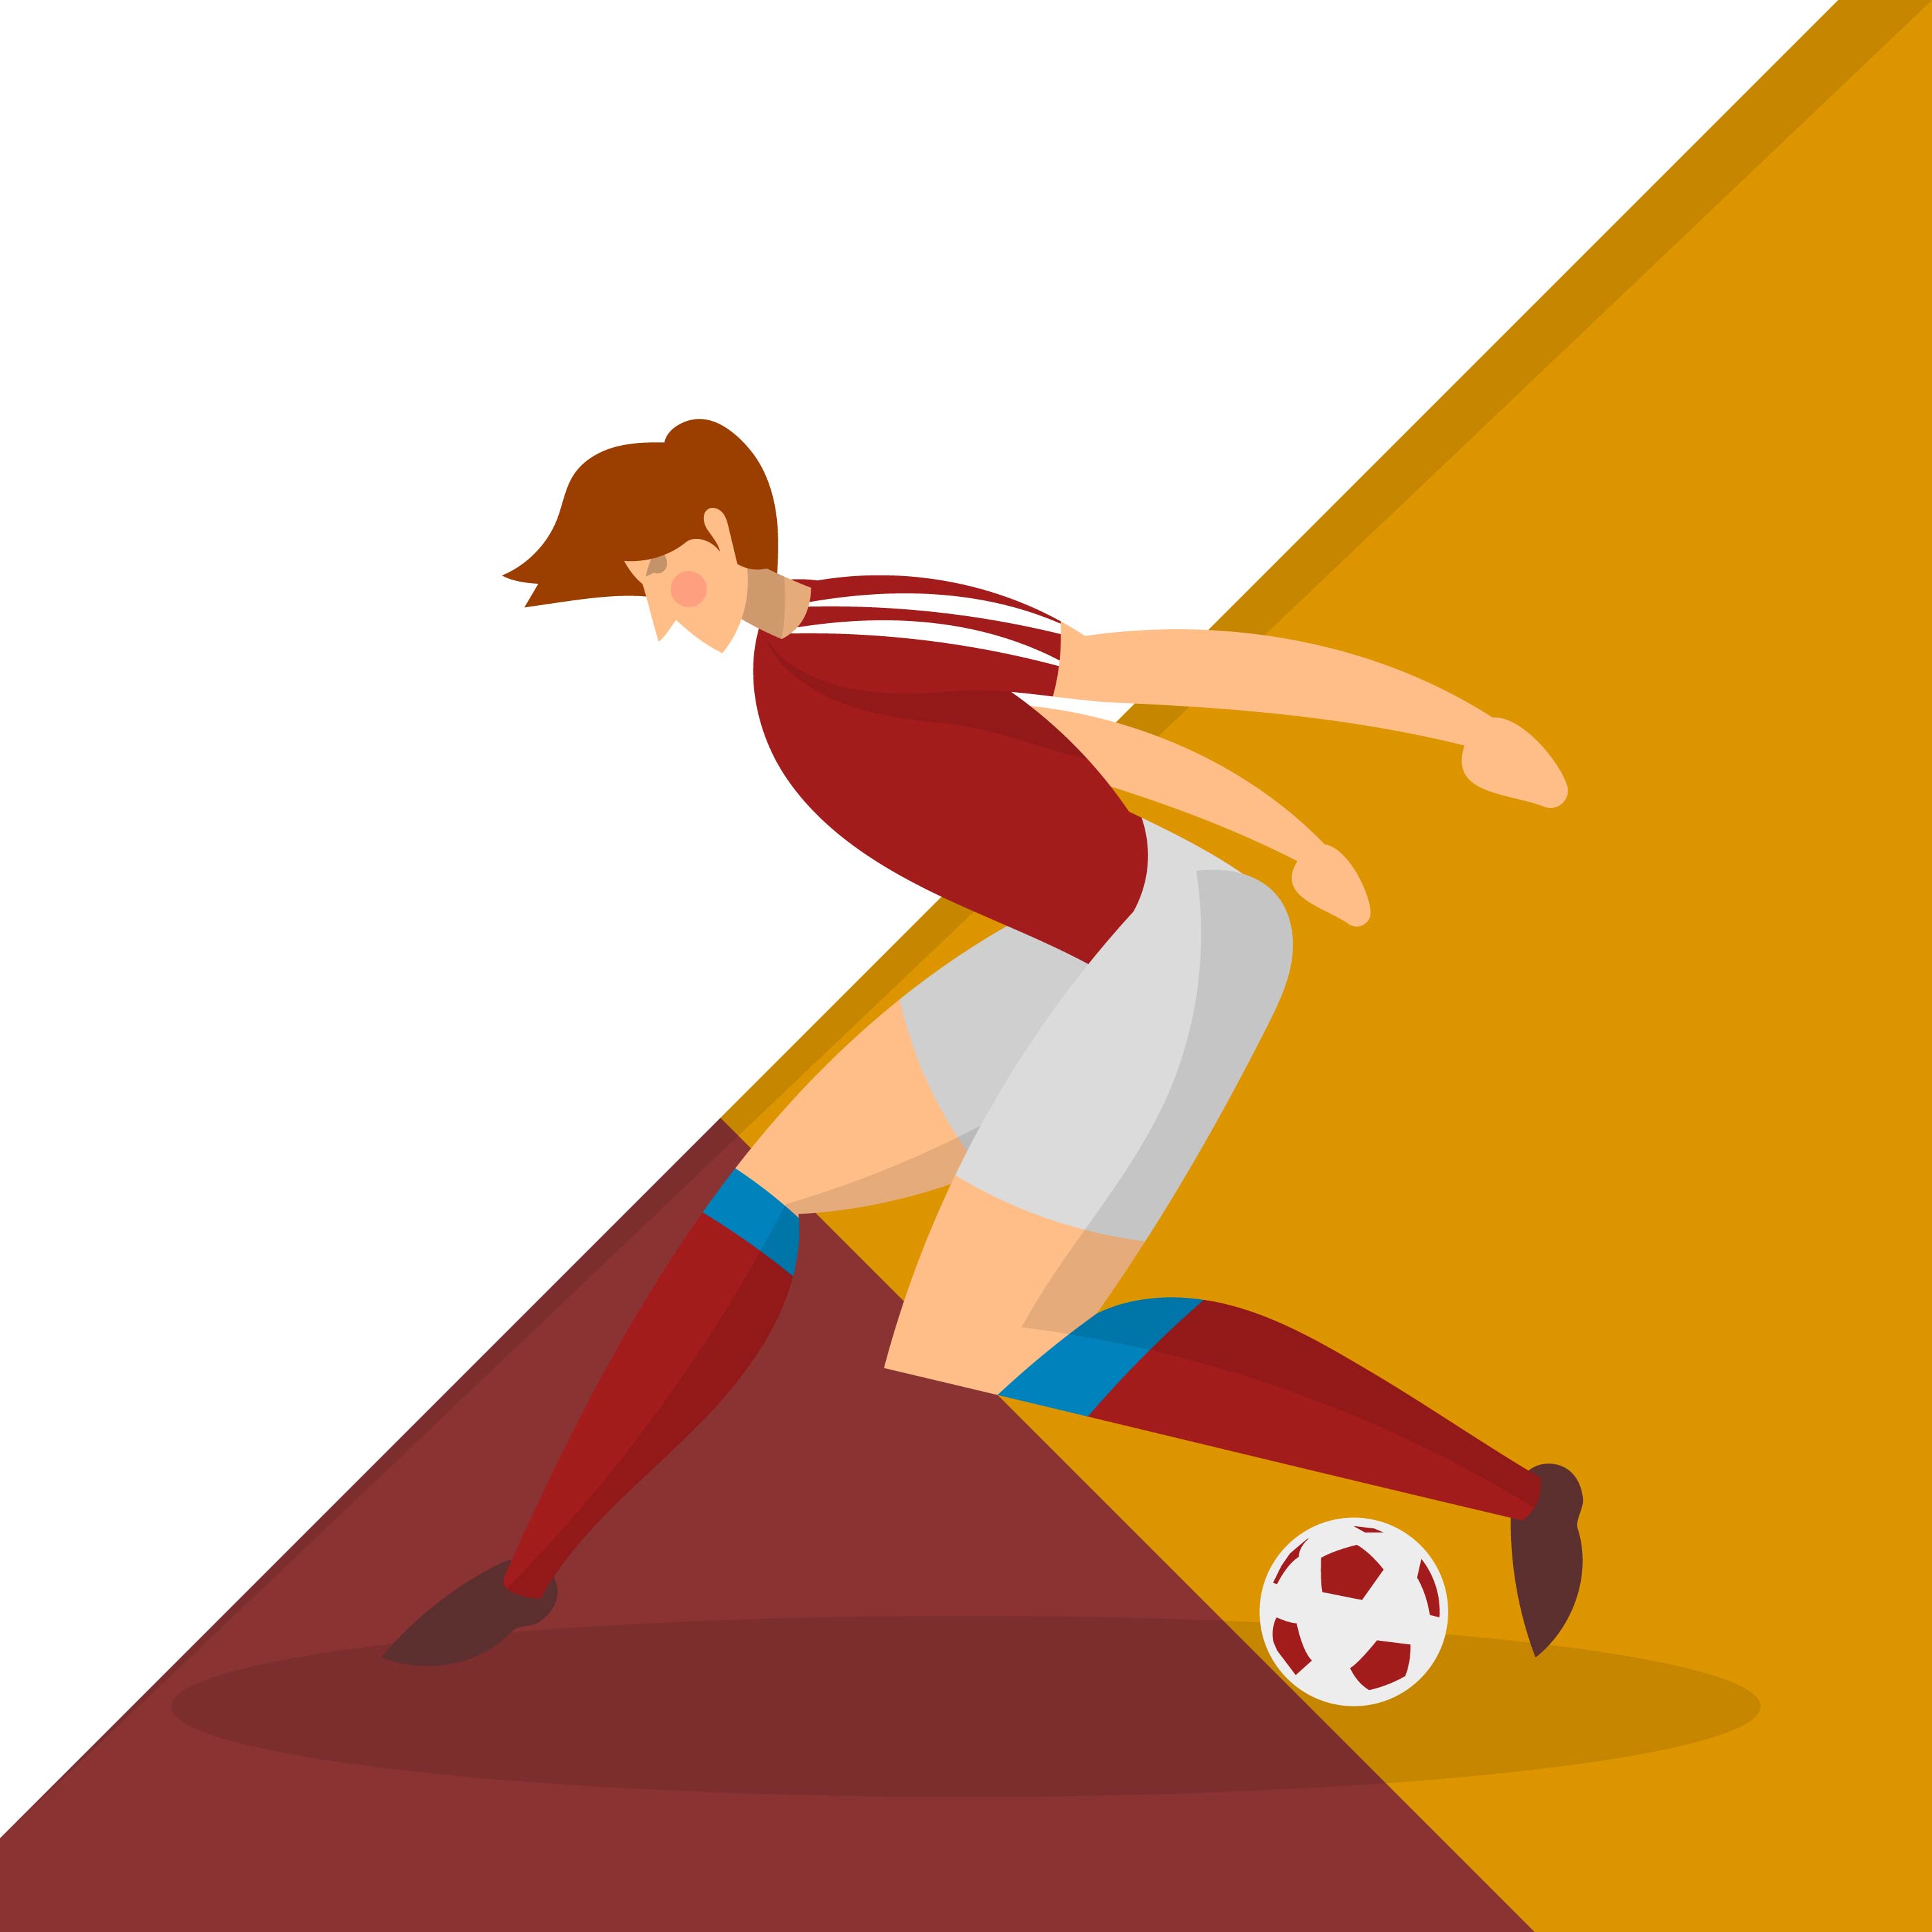 Modern Minimalist Russia Soccer Player Dribble A Ball With Abstract Geometric Background Vector Illustration Download Free Vectors Clipart Graphics Vector Art,Small Bedroom Interior Design Philippines